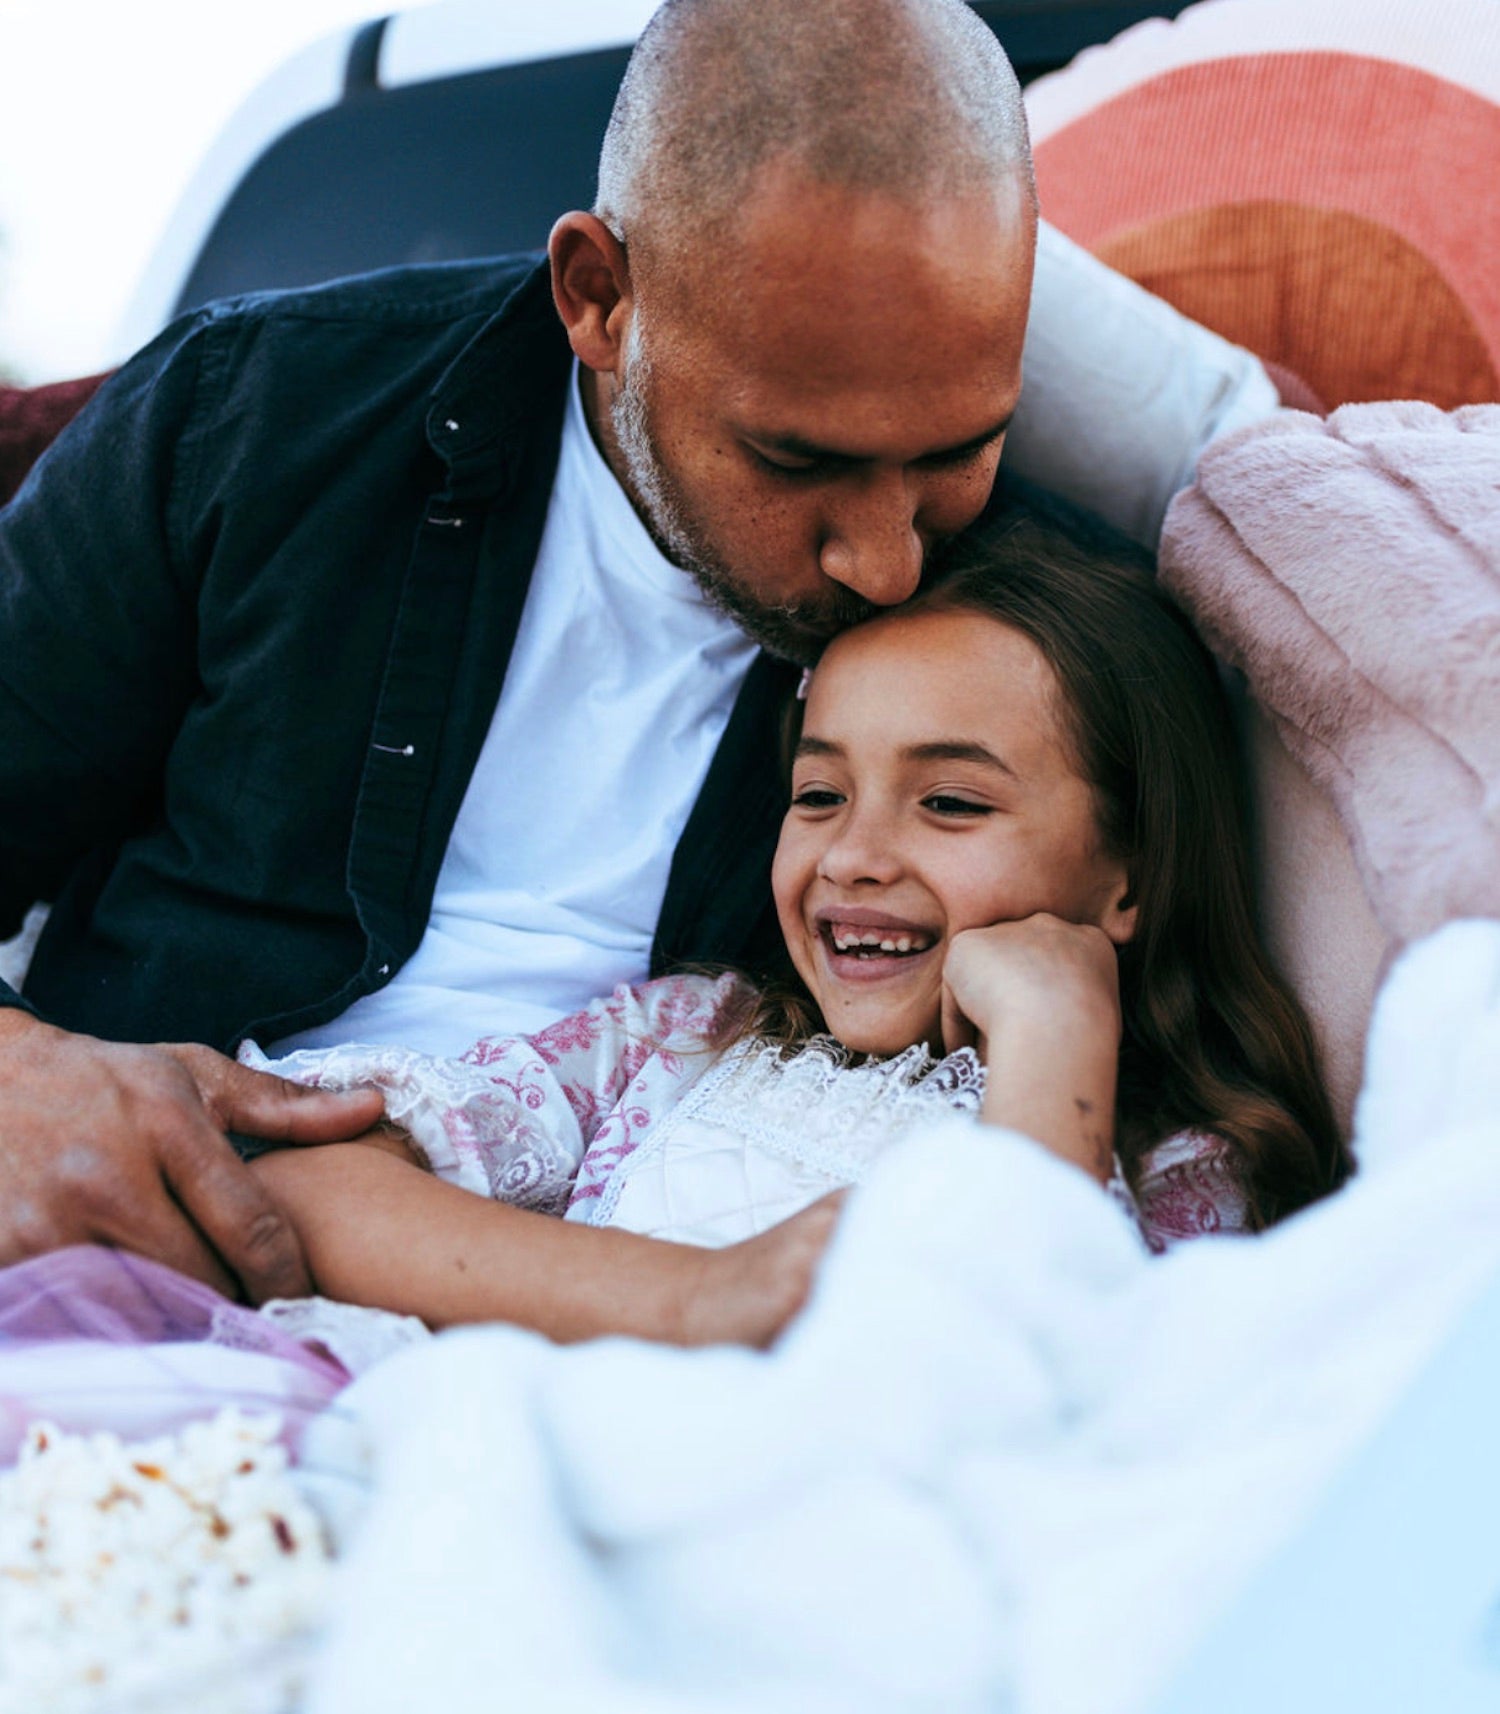 13 calming bedtime activities for a more peaceful sleep for your children: Father planting a kiss on his daughter's forehead as she smiles while they both sit on a couch